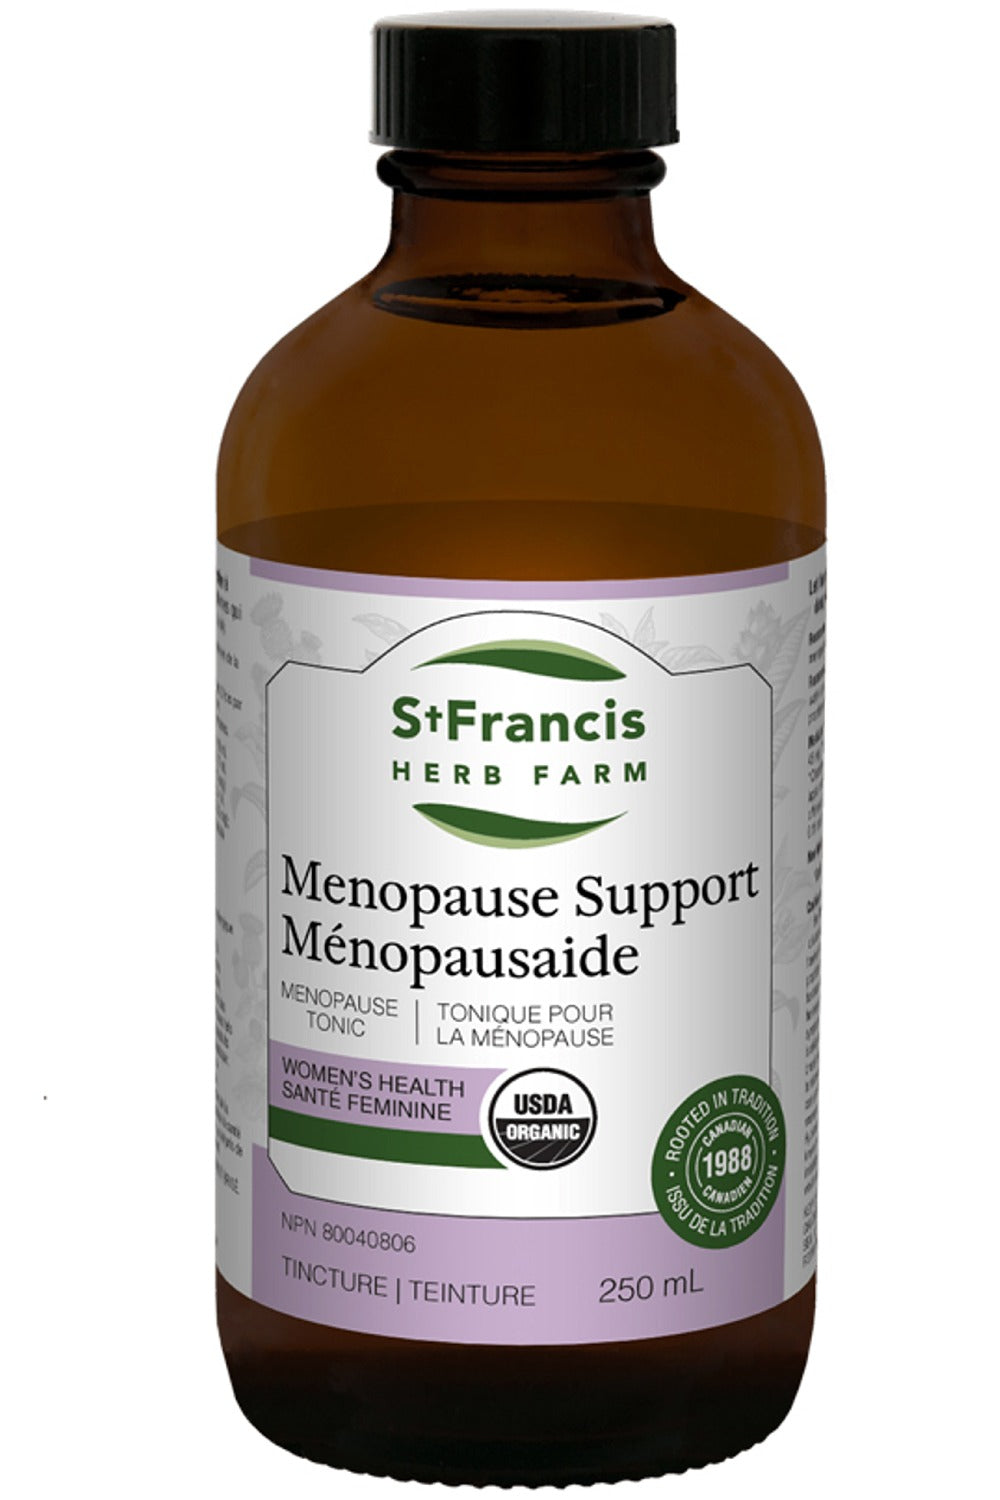 ST FRANCIS HERB FARM Menopause Support ( ml